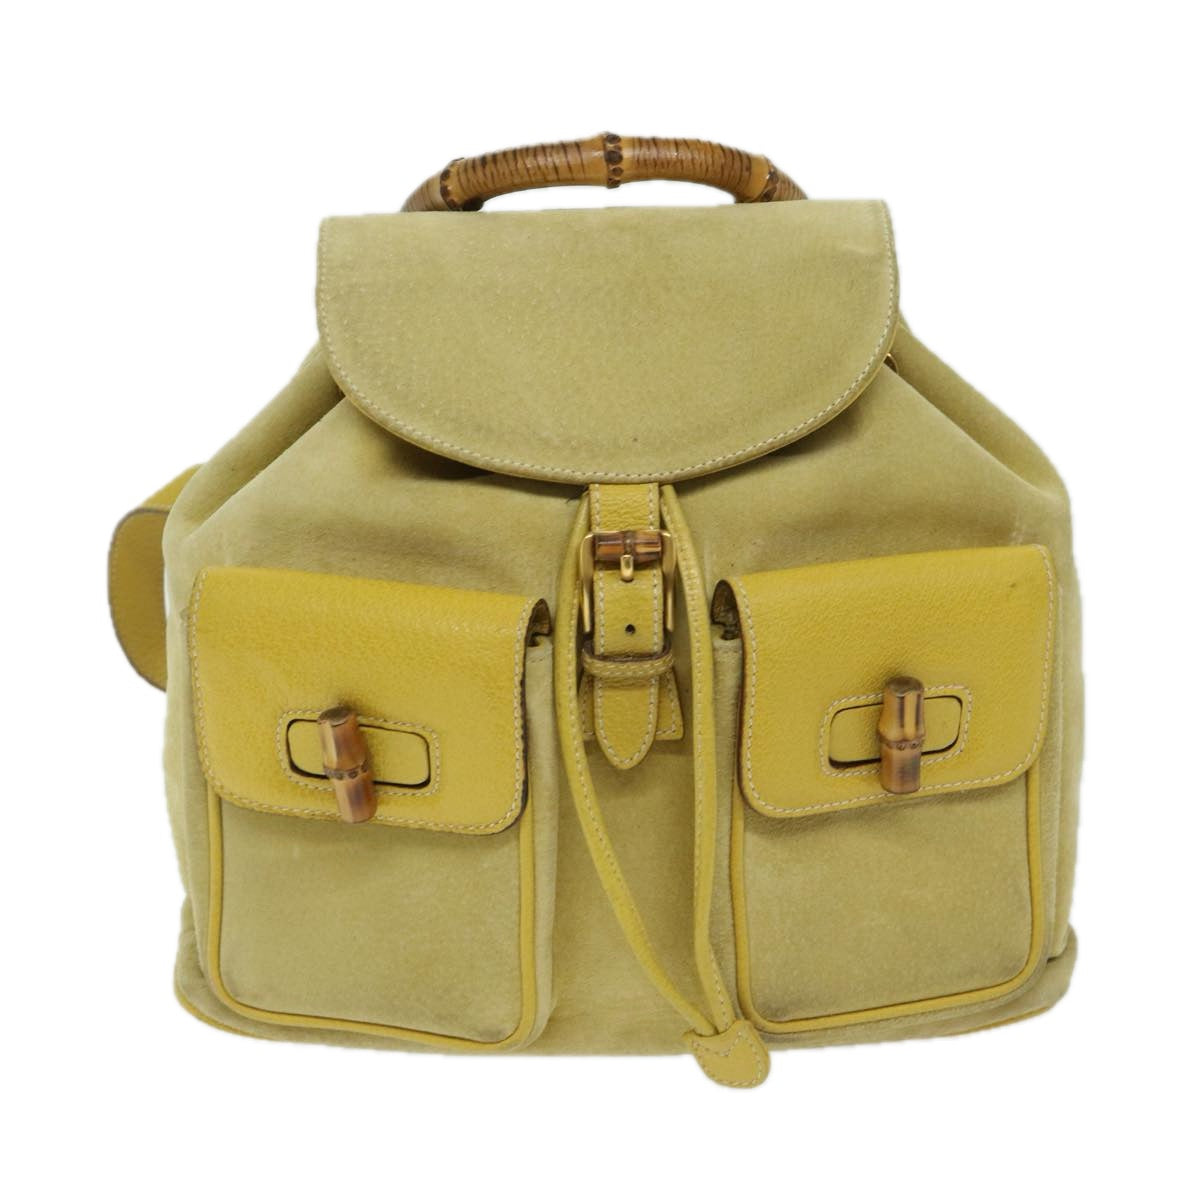 Gucci Bamboo Yellow Suede Backpack Bag ()